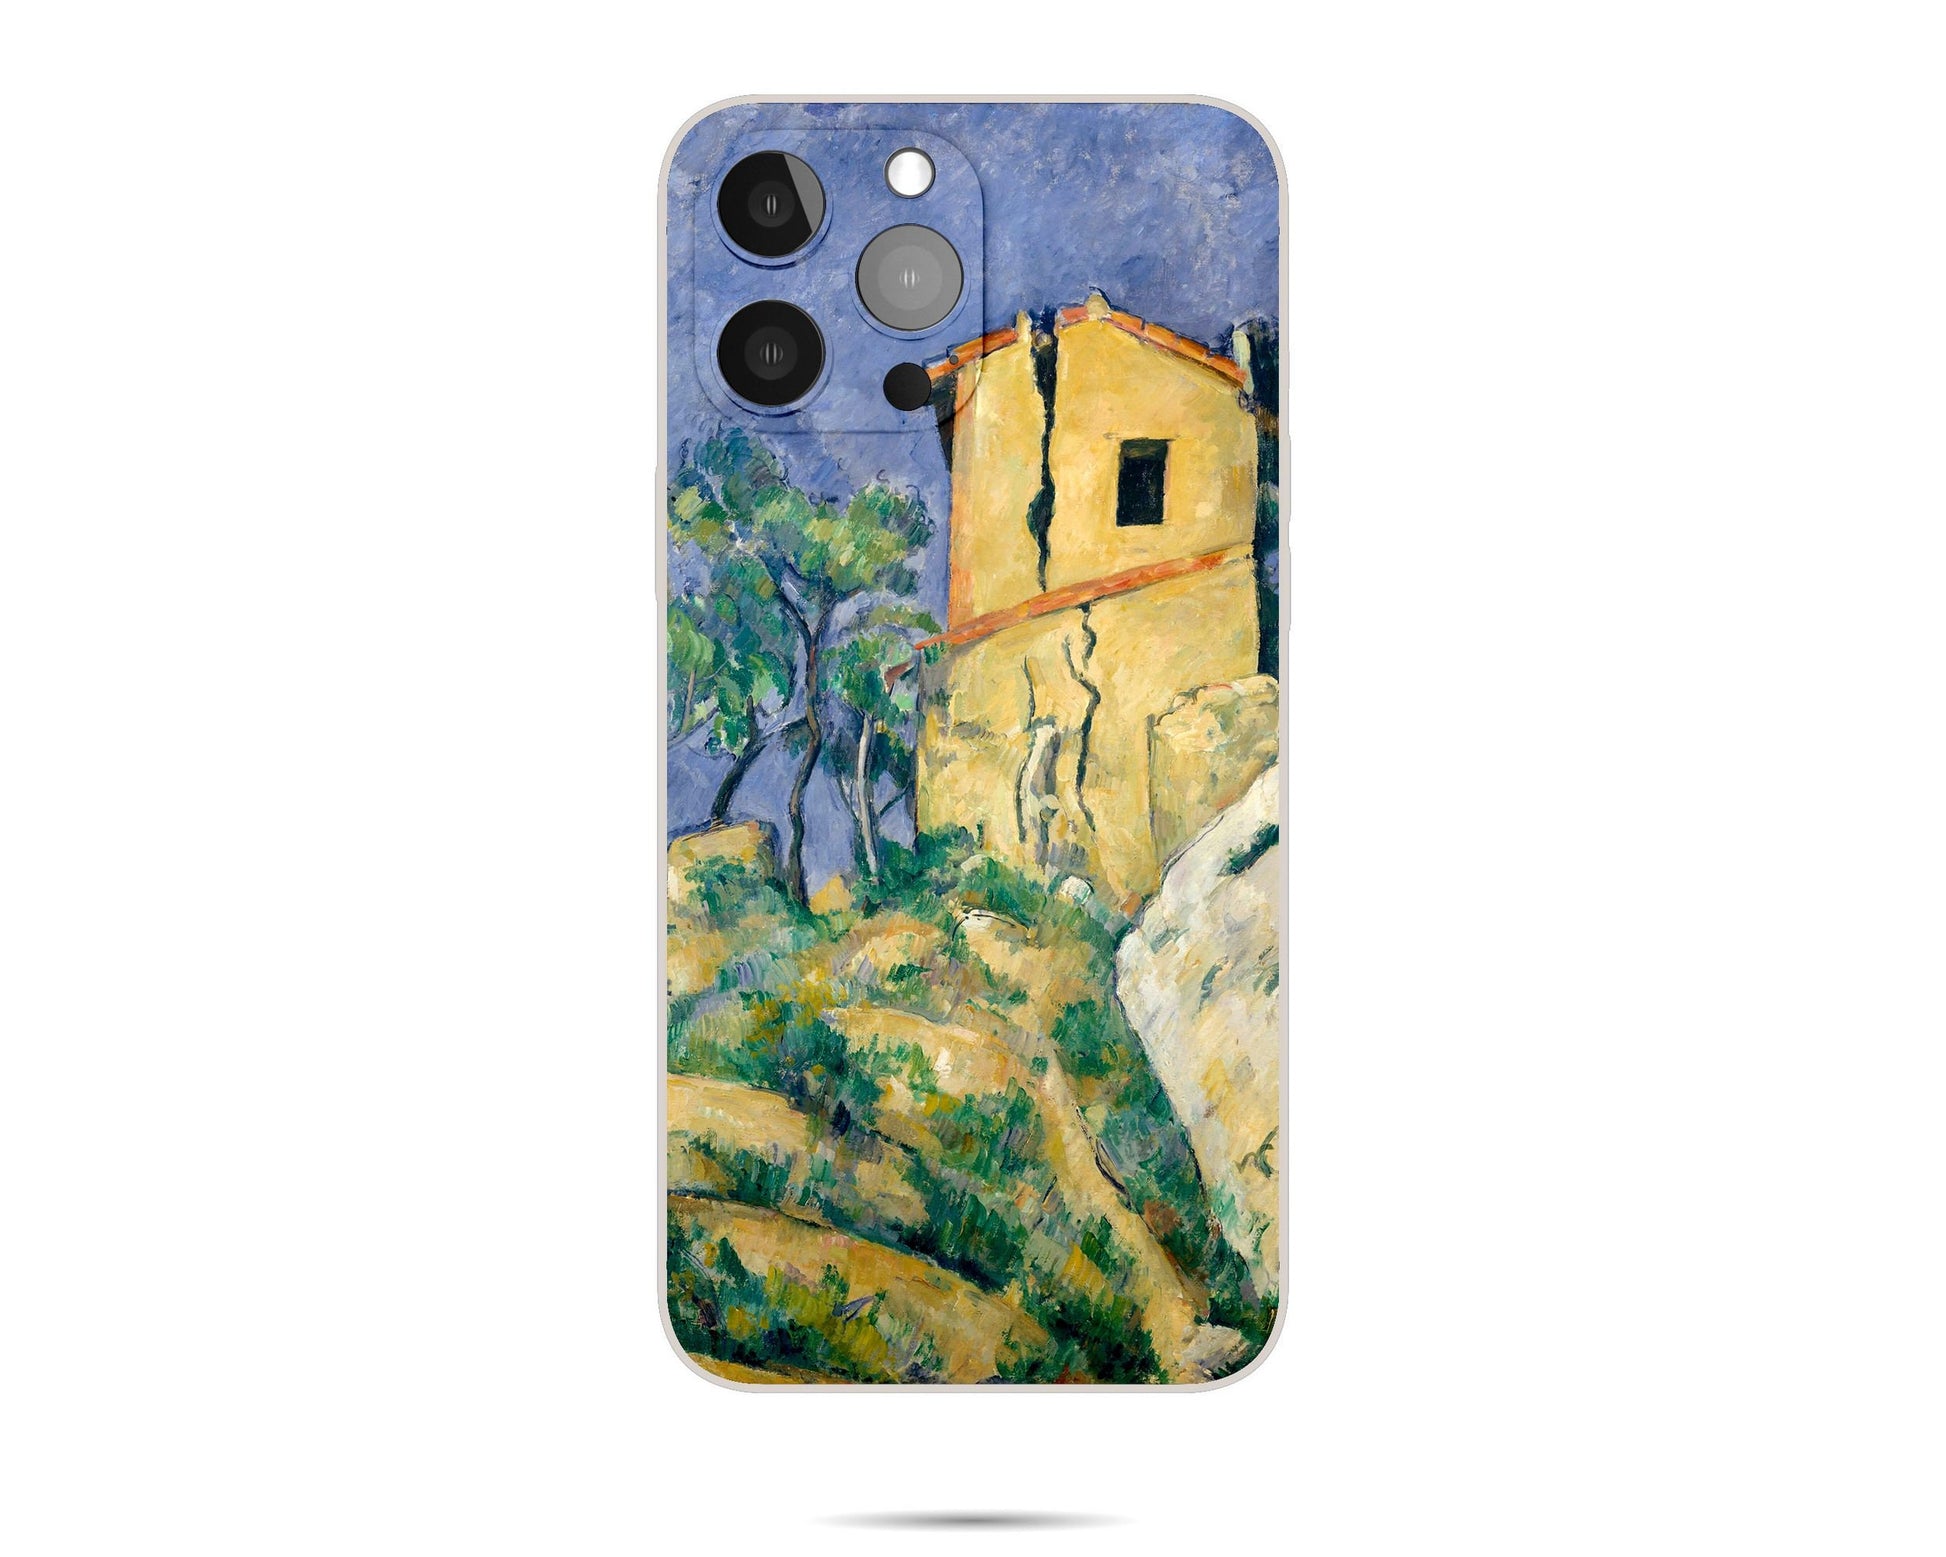 Iphone 14 Case Of Paul Cézanne Famous Landscape Painting, Iphone 8Plus, Iphone 7 Plus Case, Designer Iphone Case, Birthday Gift, Silicone